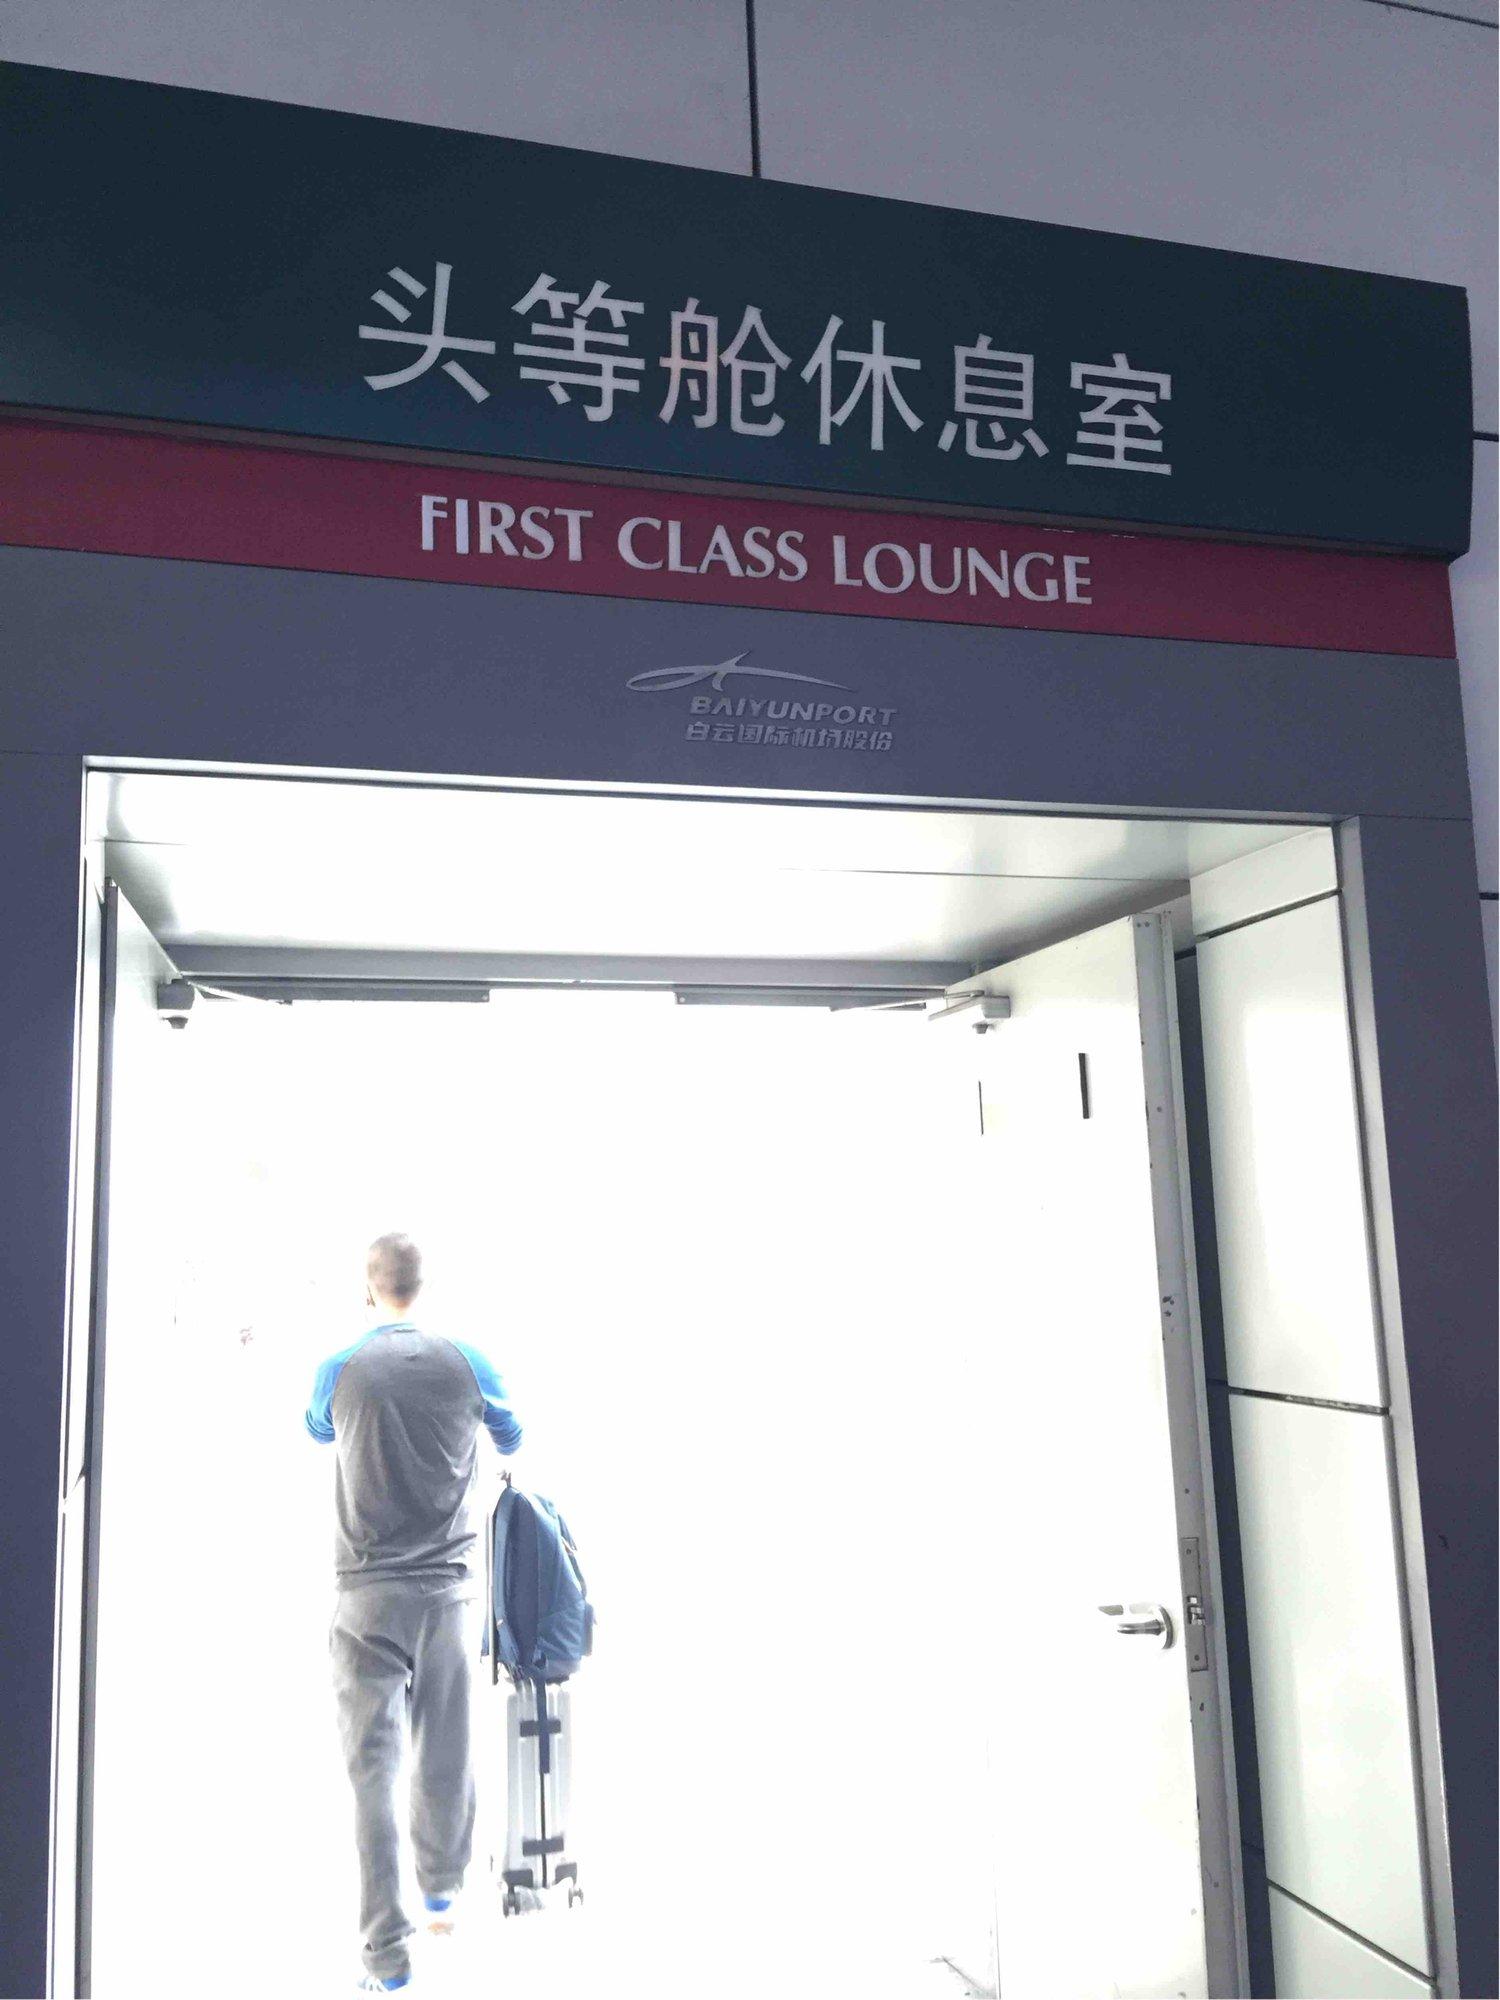 Baiyun Airport First Class Lounge (Closed For Renovation) image 8 of 10